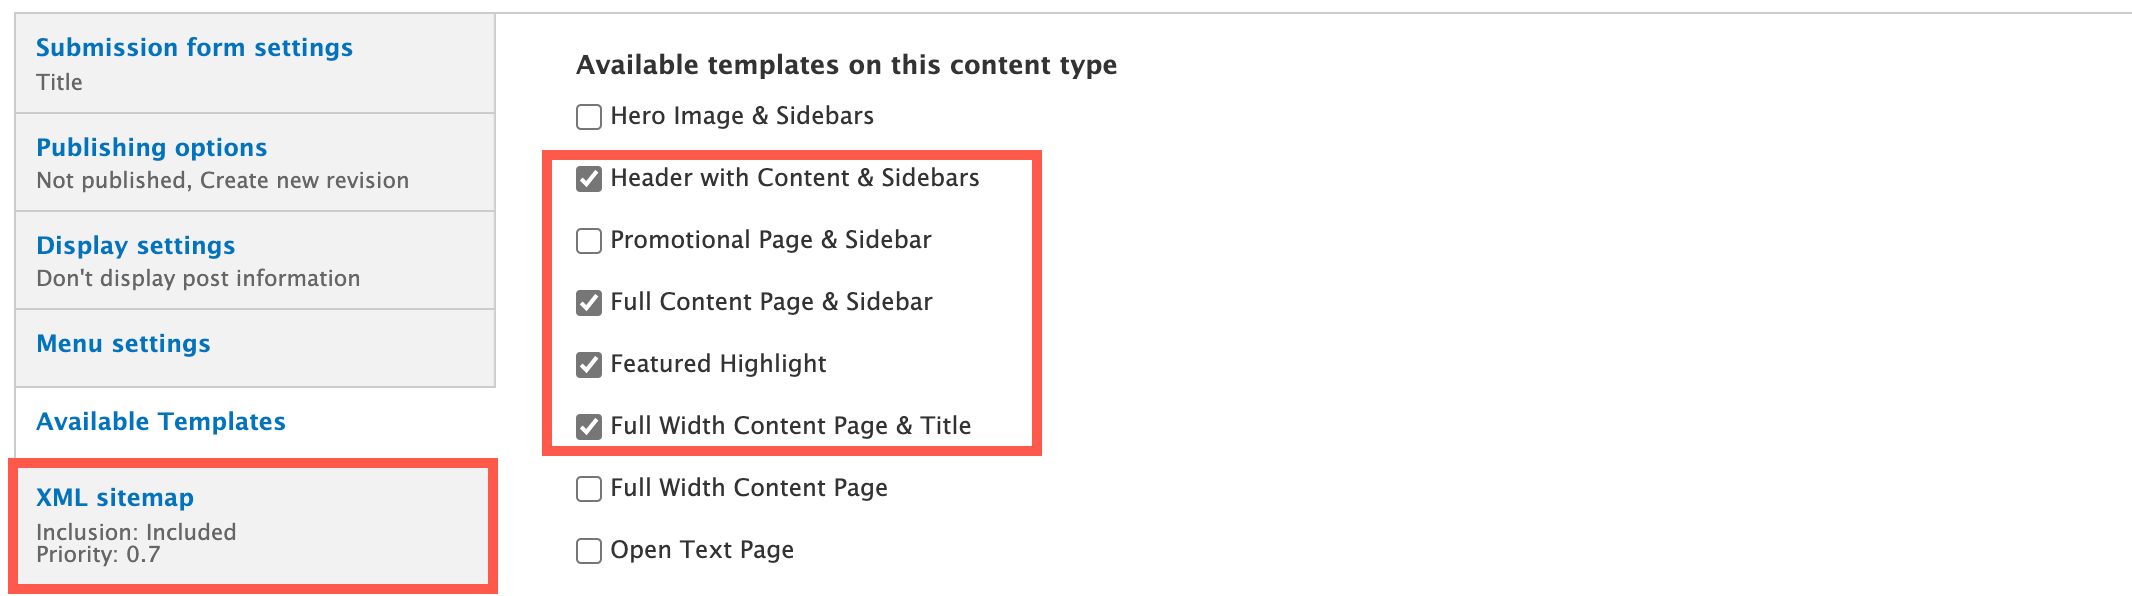 Carousel content type settings, template selection